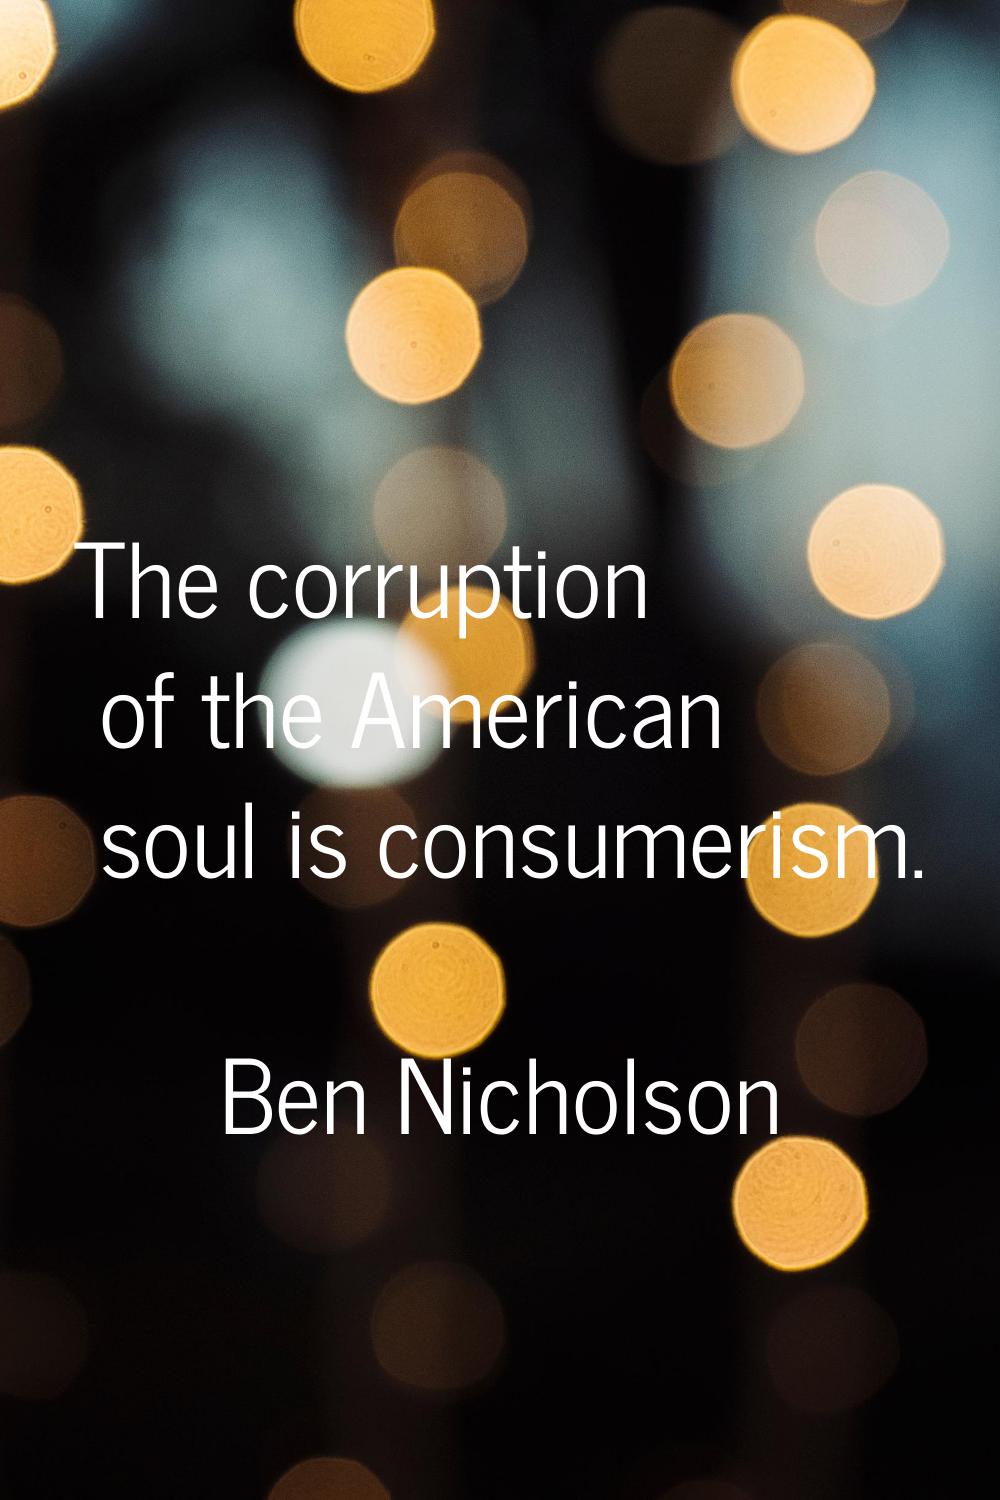 The corruption of the American soul is consumerism.